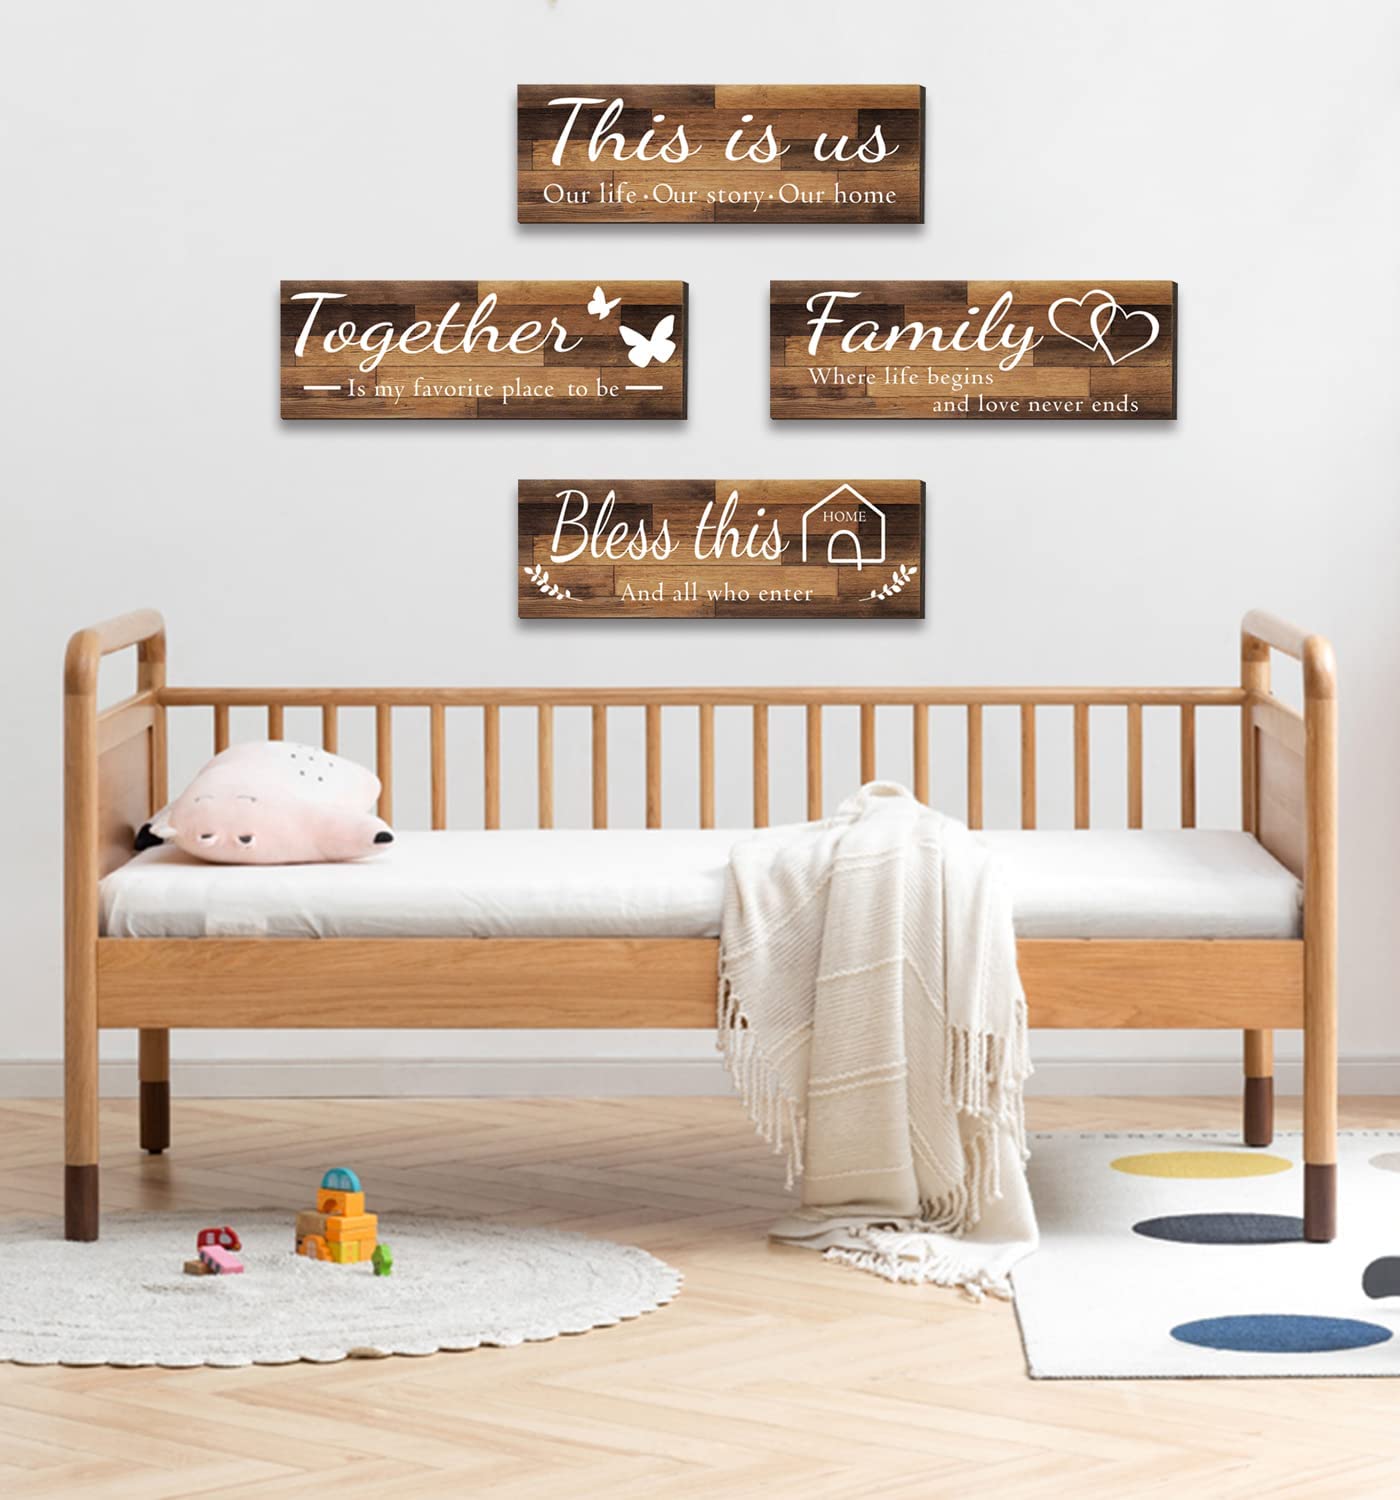 4 Pieces Home Wall Decor Signs, THIS IS US/TOGETHER/BLESS THIS HOME/FAMILY Wall Decor For Living Room Bedroom, Rustic Wooden Farmhouse Wall Art Decor, 4.7 x 13.8 Inch(Brown)